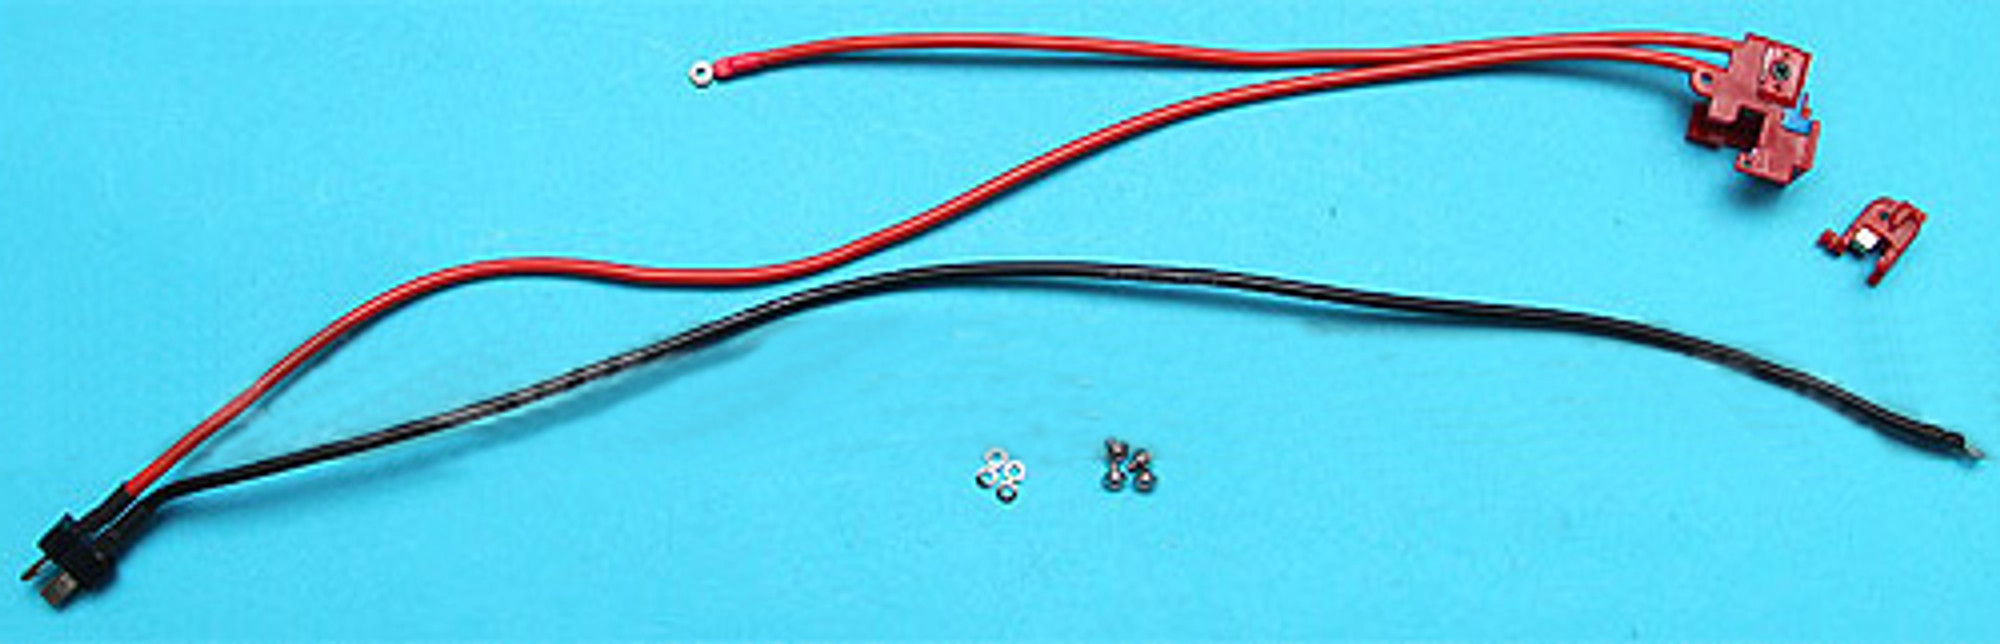 G&P Wiring Switch Assembly For G&P M4 M16 series Airosft AEG - Crane Stock  Rear Wiring  Standard Deans